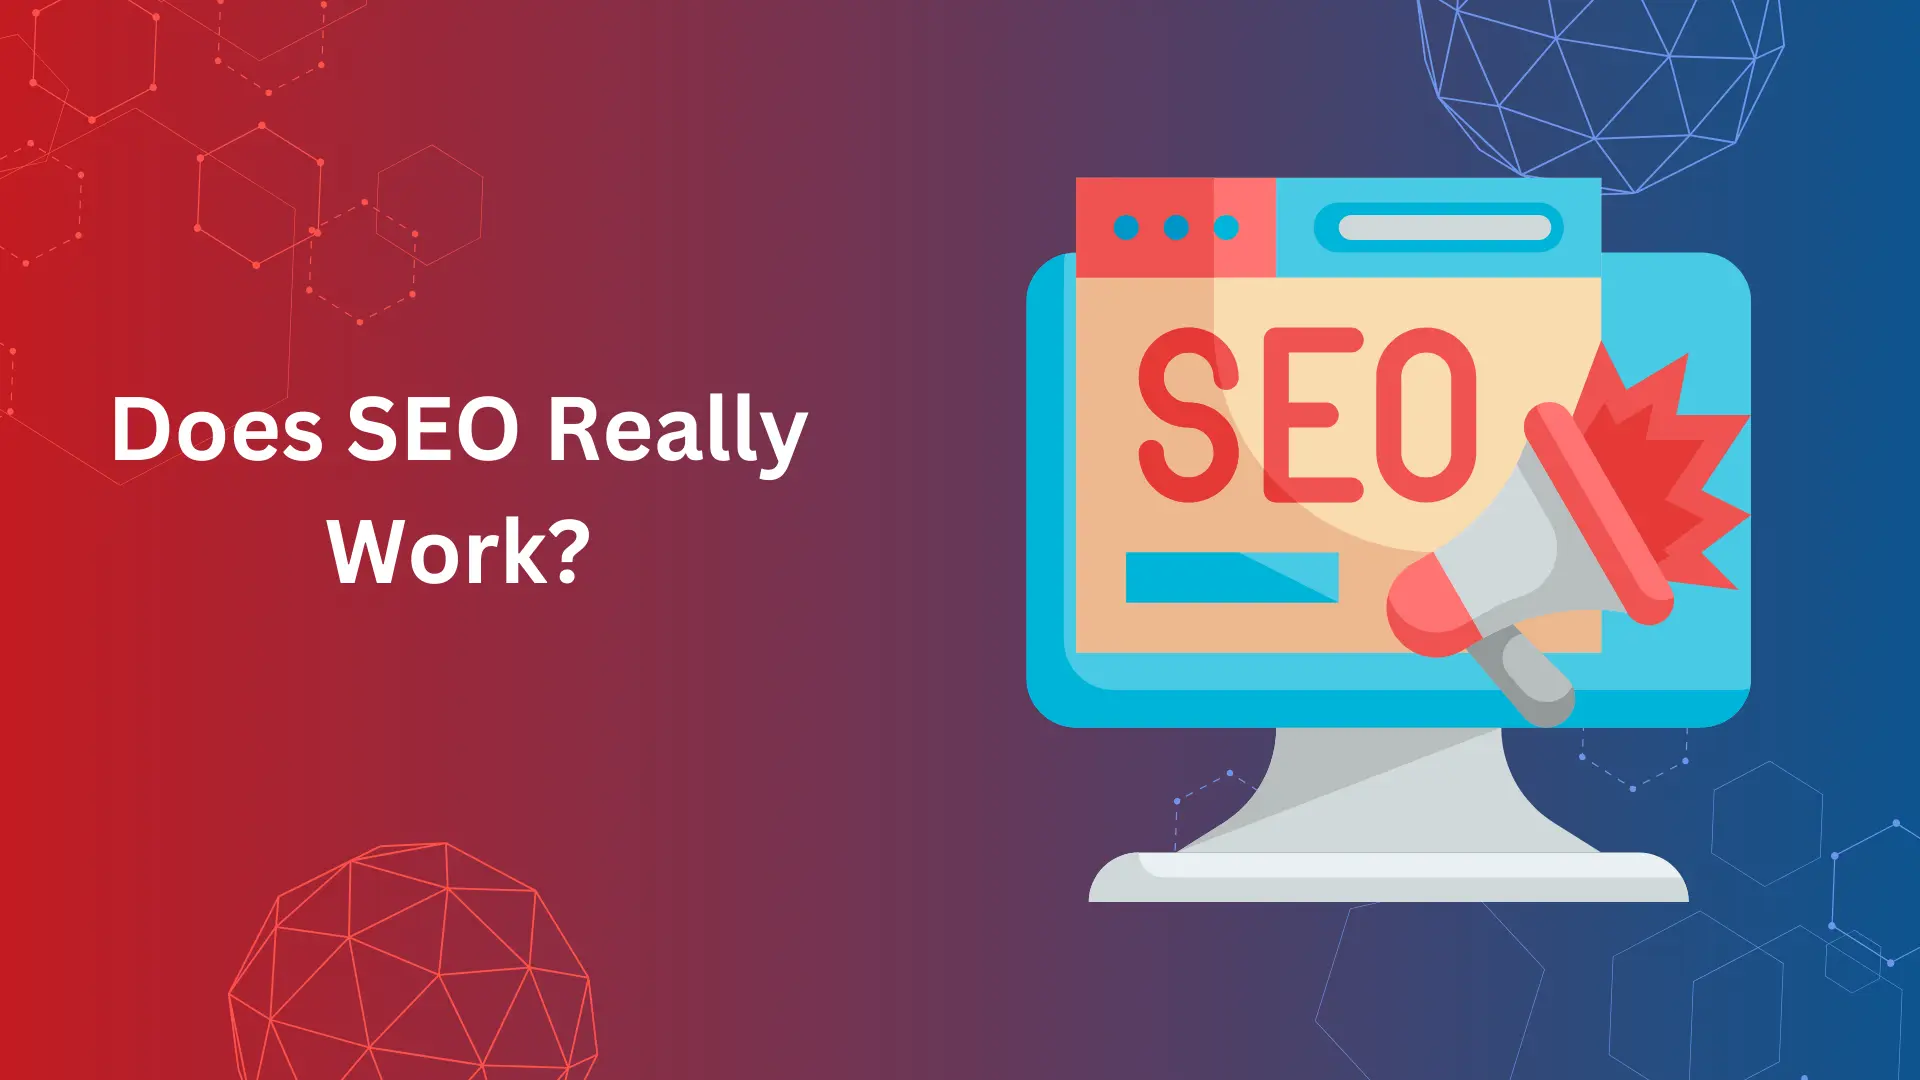 Does SEO Really Work